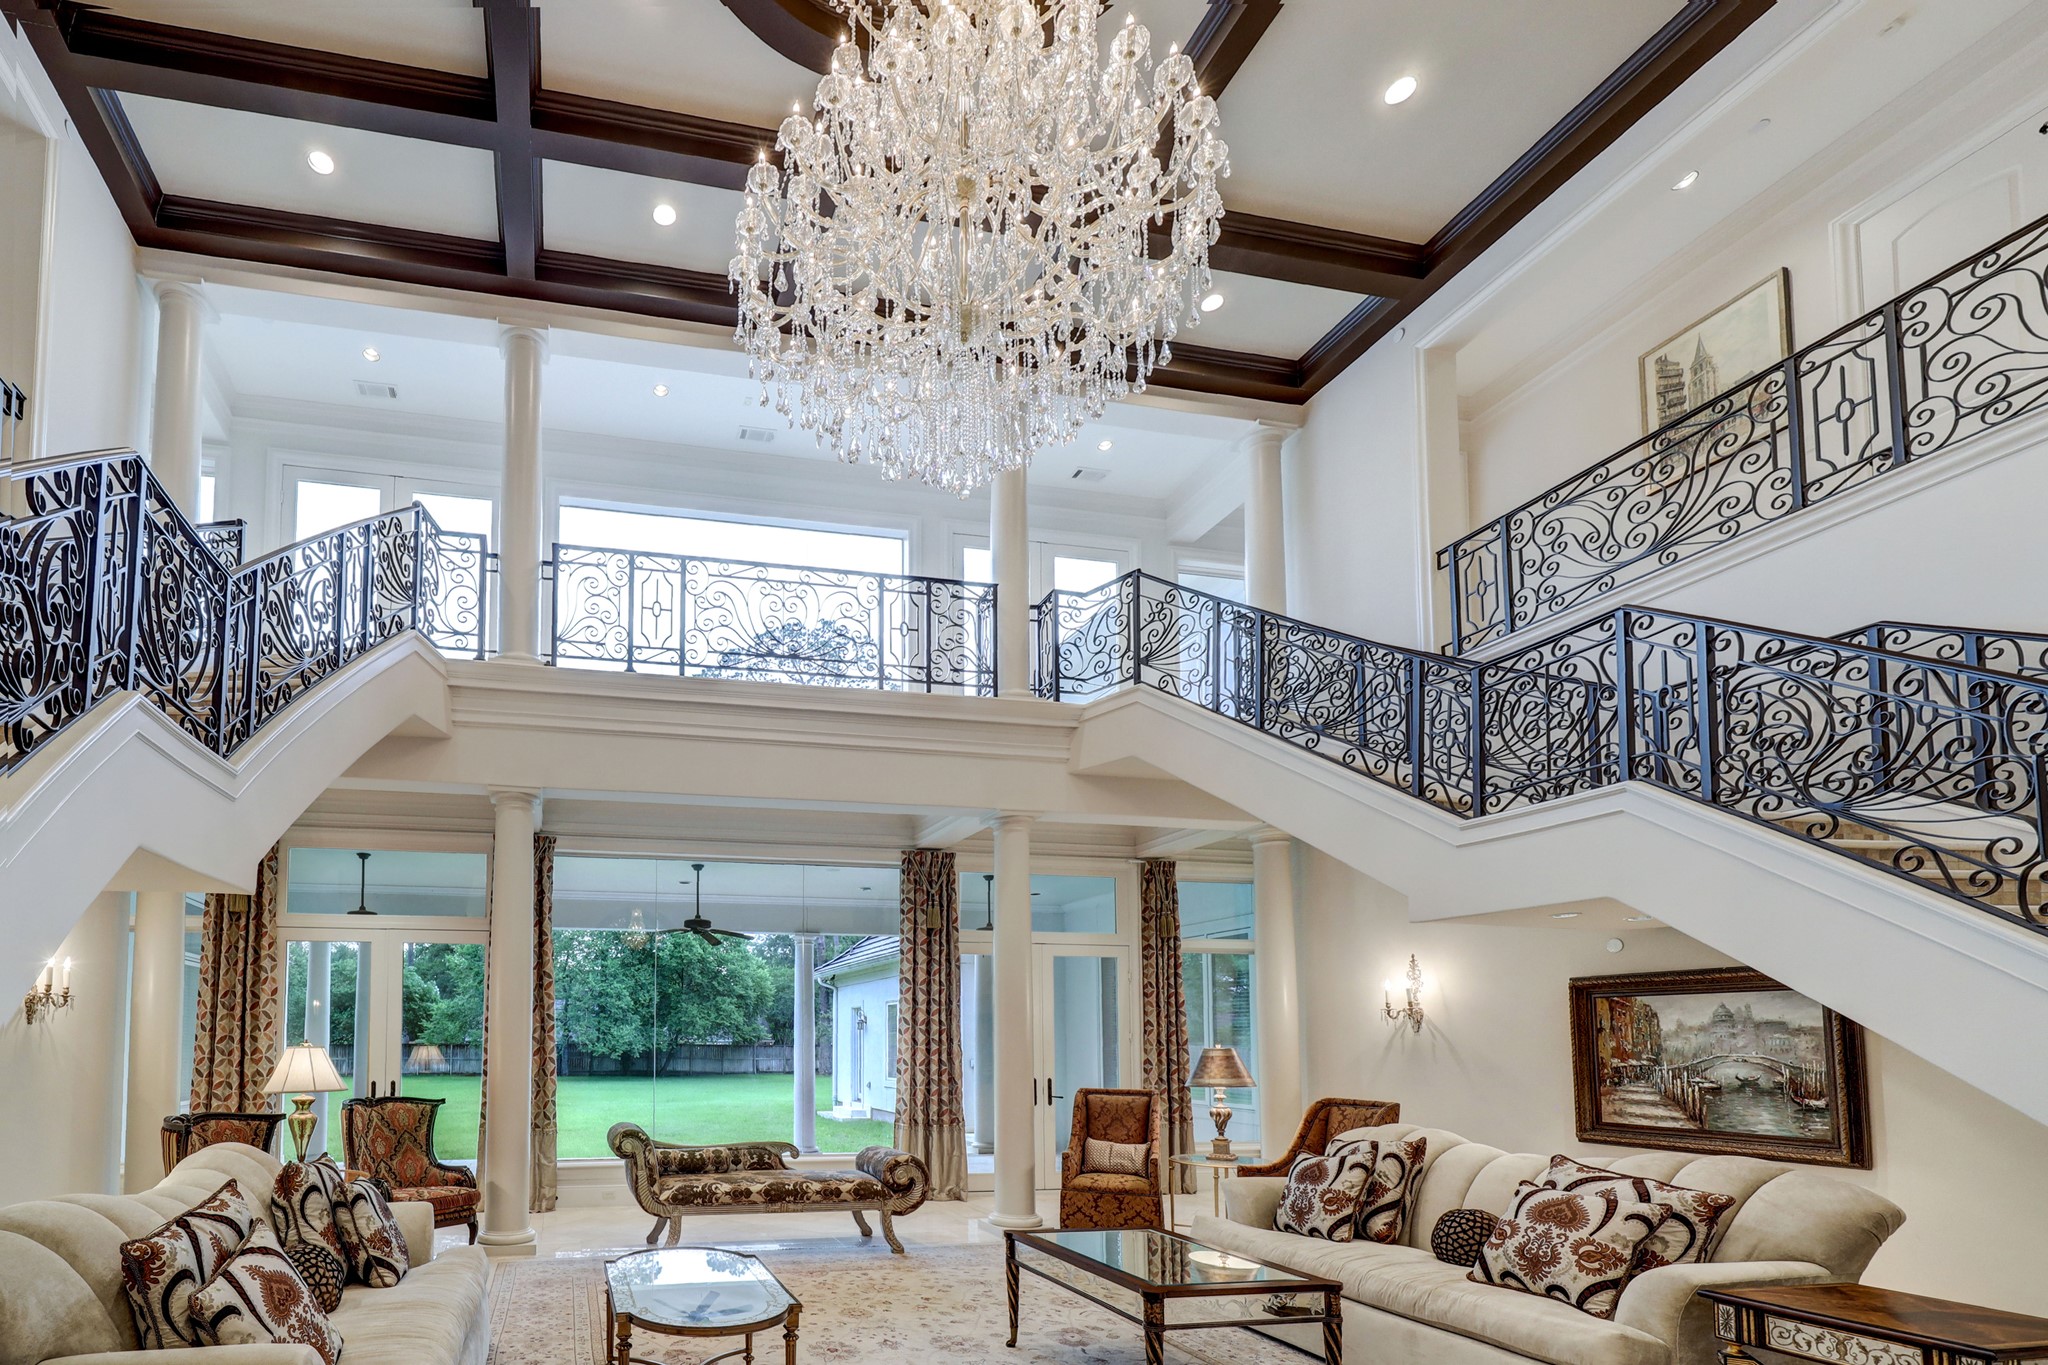 Another view of the stunning two-story living room.